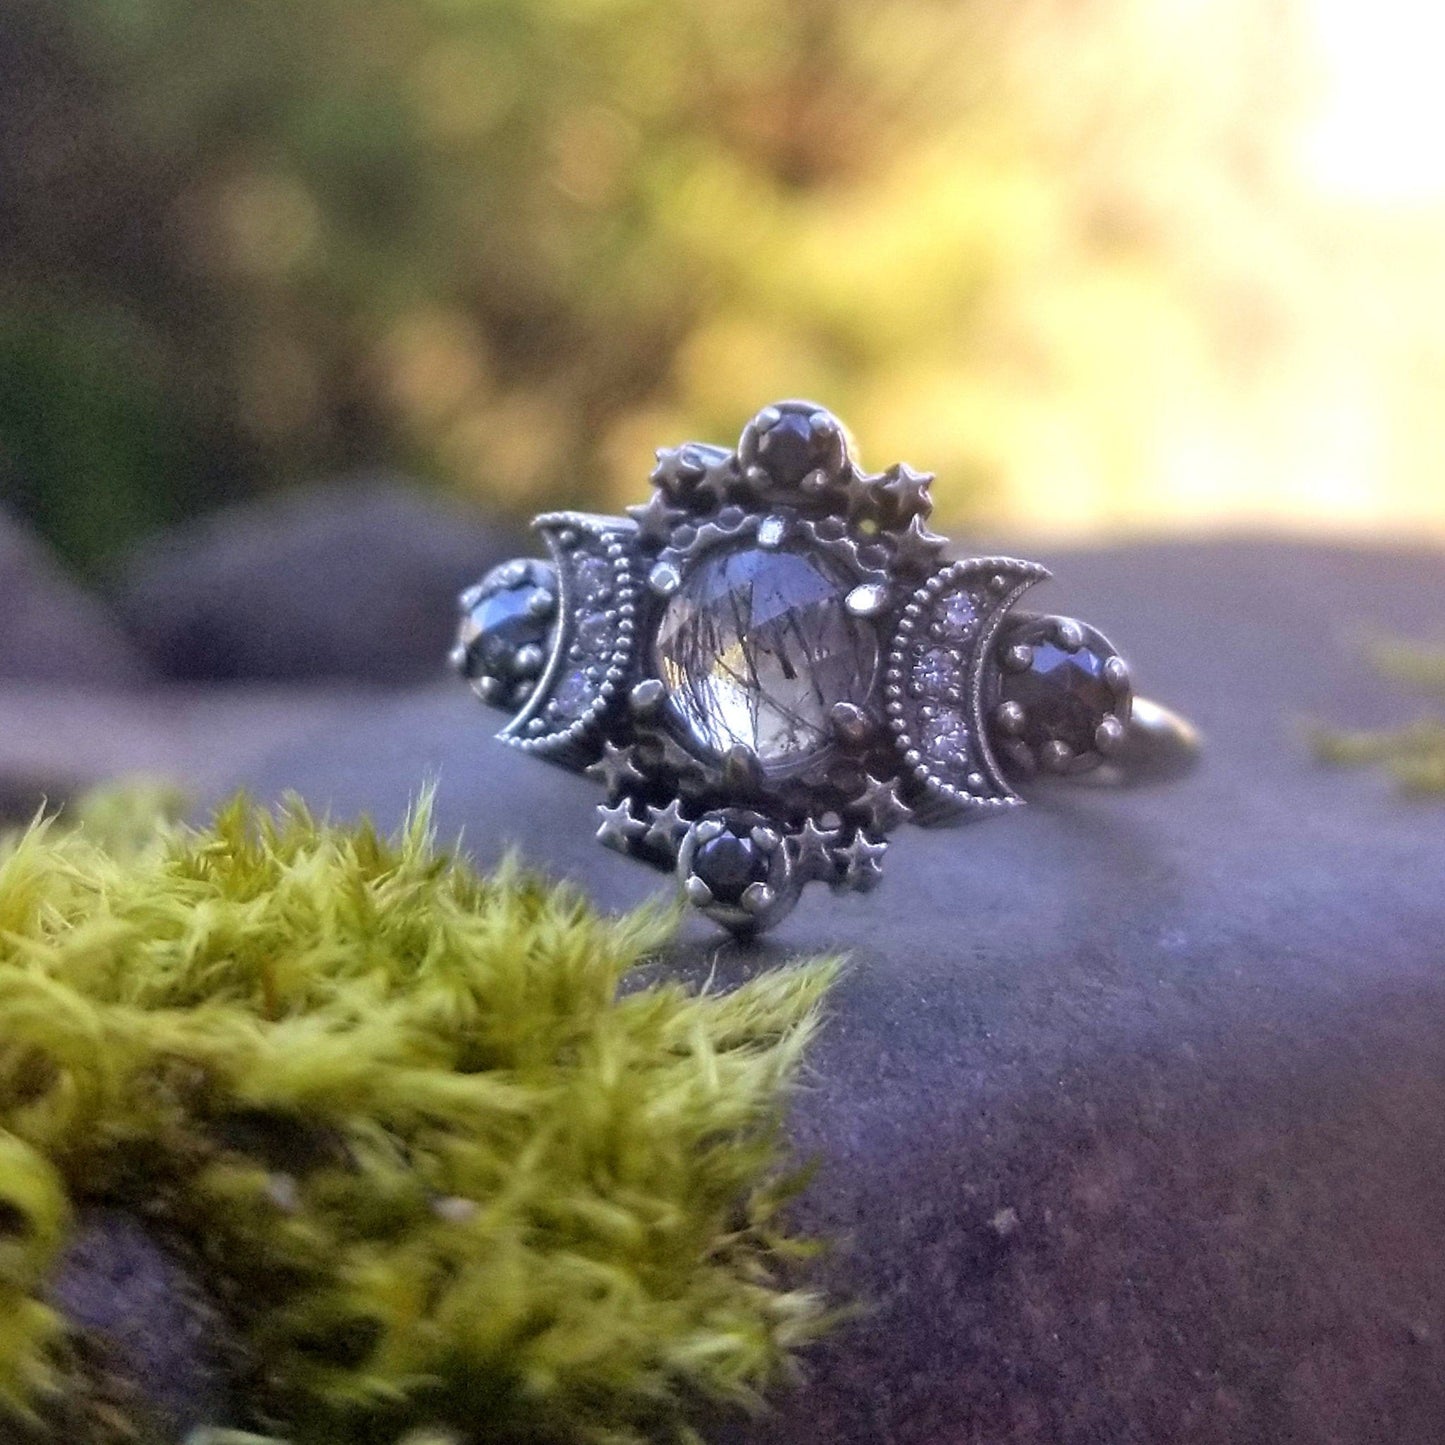 Black Rutile Quartz Cosmos Moon and Star Ring - Sterling Silver with Stardust Diamond Chevron